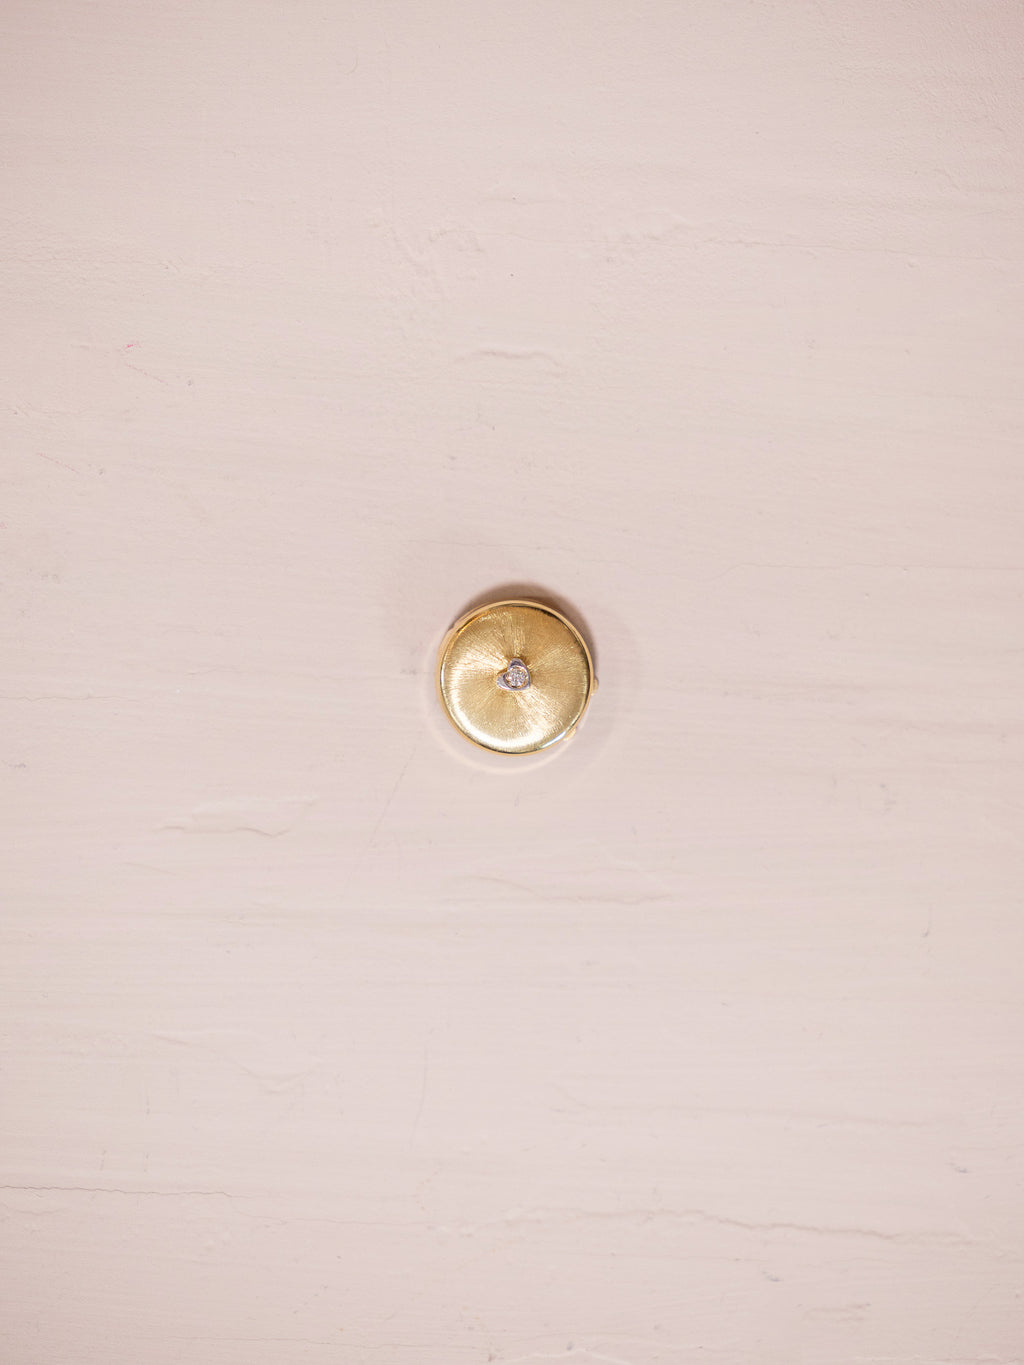 Gold button cover with single diamond on pink background.